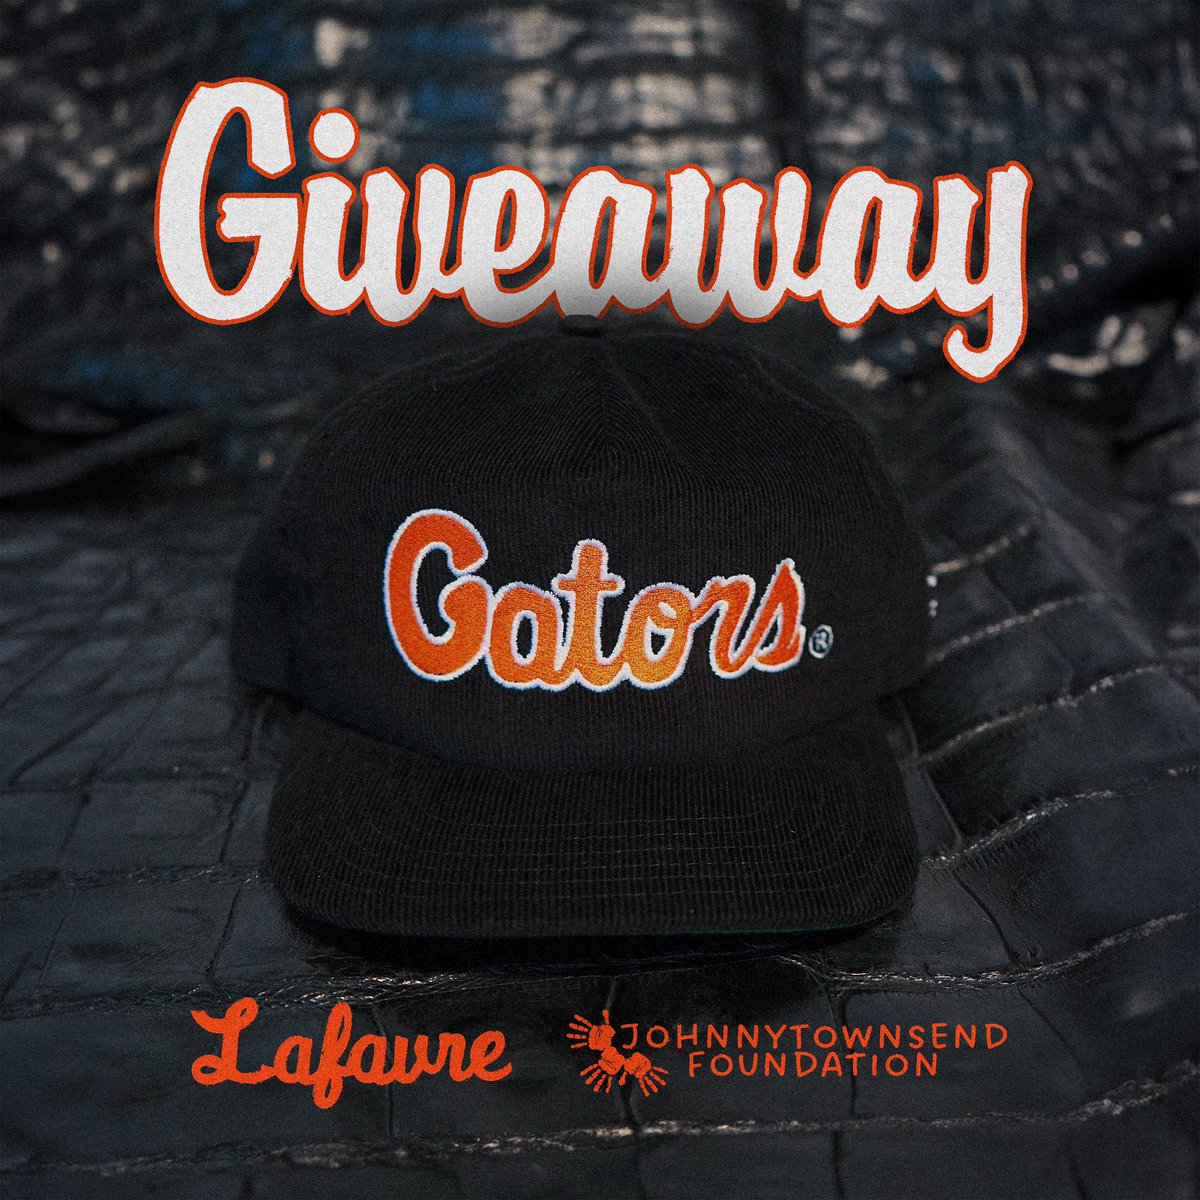 The Johnny Townsend Foundation teamed up with @Lafavreus to drop an EXCLUSIVE Gator hat, for a great cause. Going live tomorrow at 9:04am on @Lafavreus website. ONLY 75 will be dropped, 100% of proceeds benefit pediatric cancer initiatives 🙌🏼